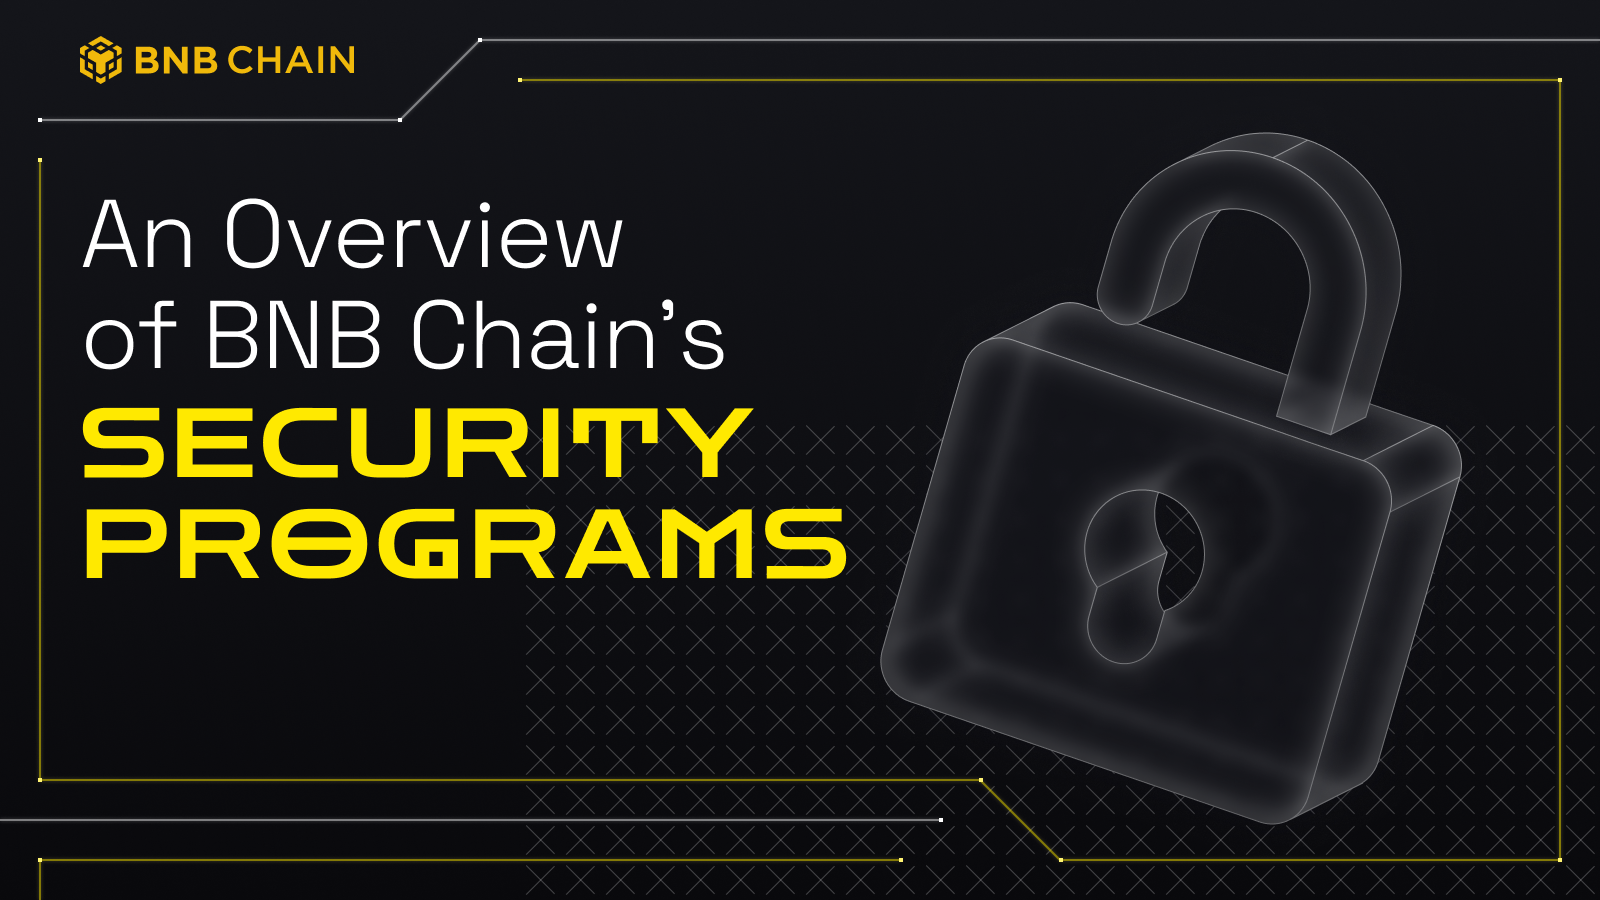 An Overview of BNB Chain’s Security Programs